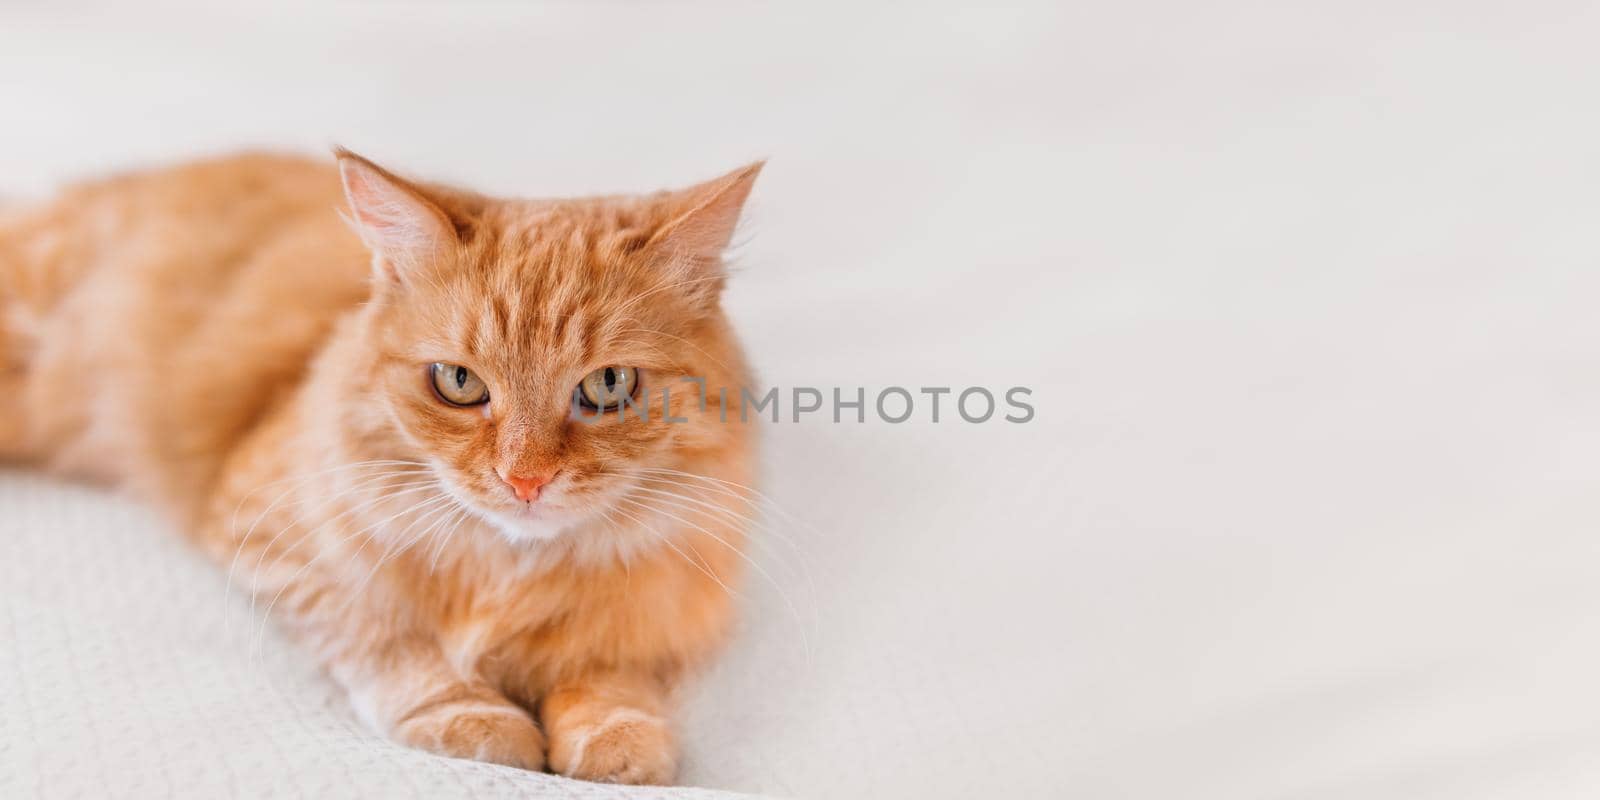 Cute ginger cat on white textile background. Attentive looking domestic animal. Fluffy pet. Background with copy space.